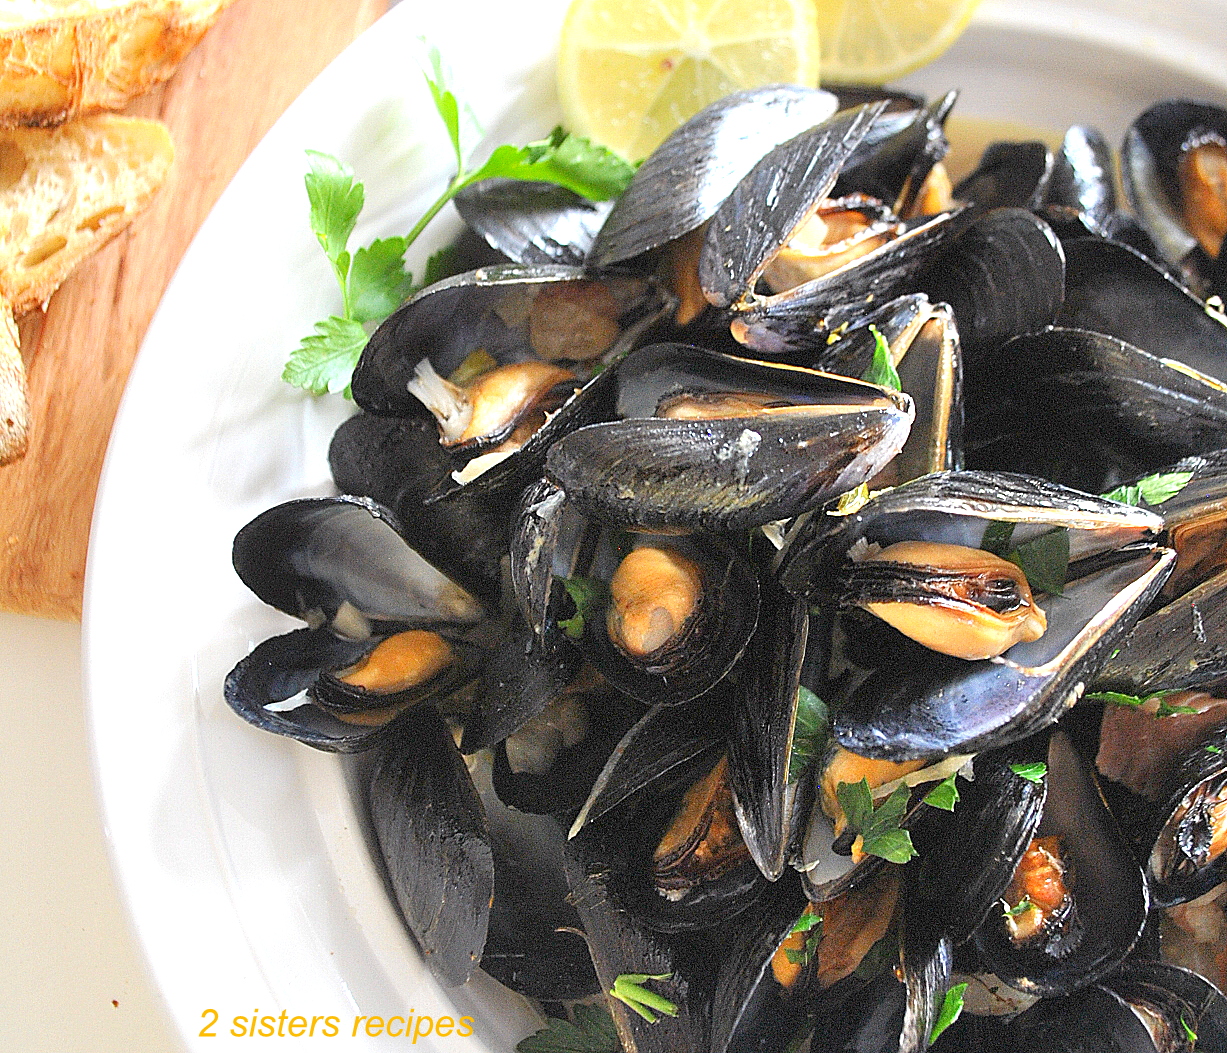 Steamed Mussels in a flavorful garlic fennel broth. by 2sistersrecipes.com